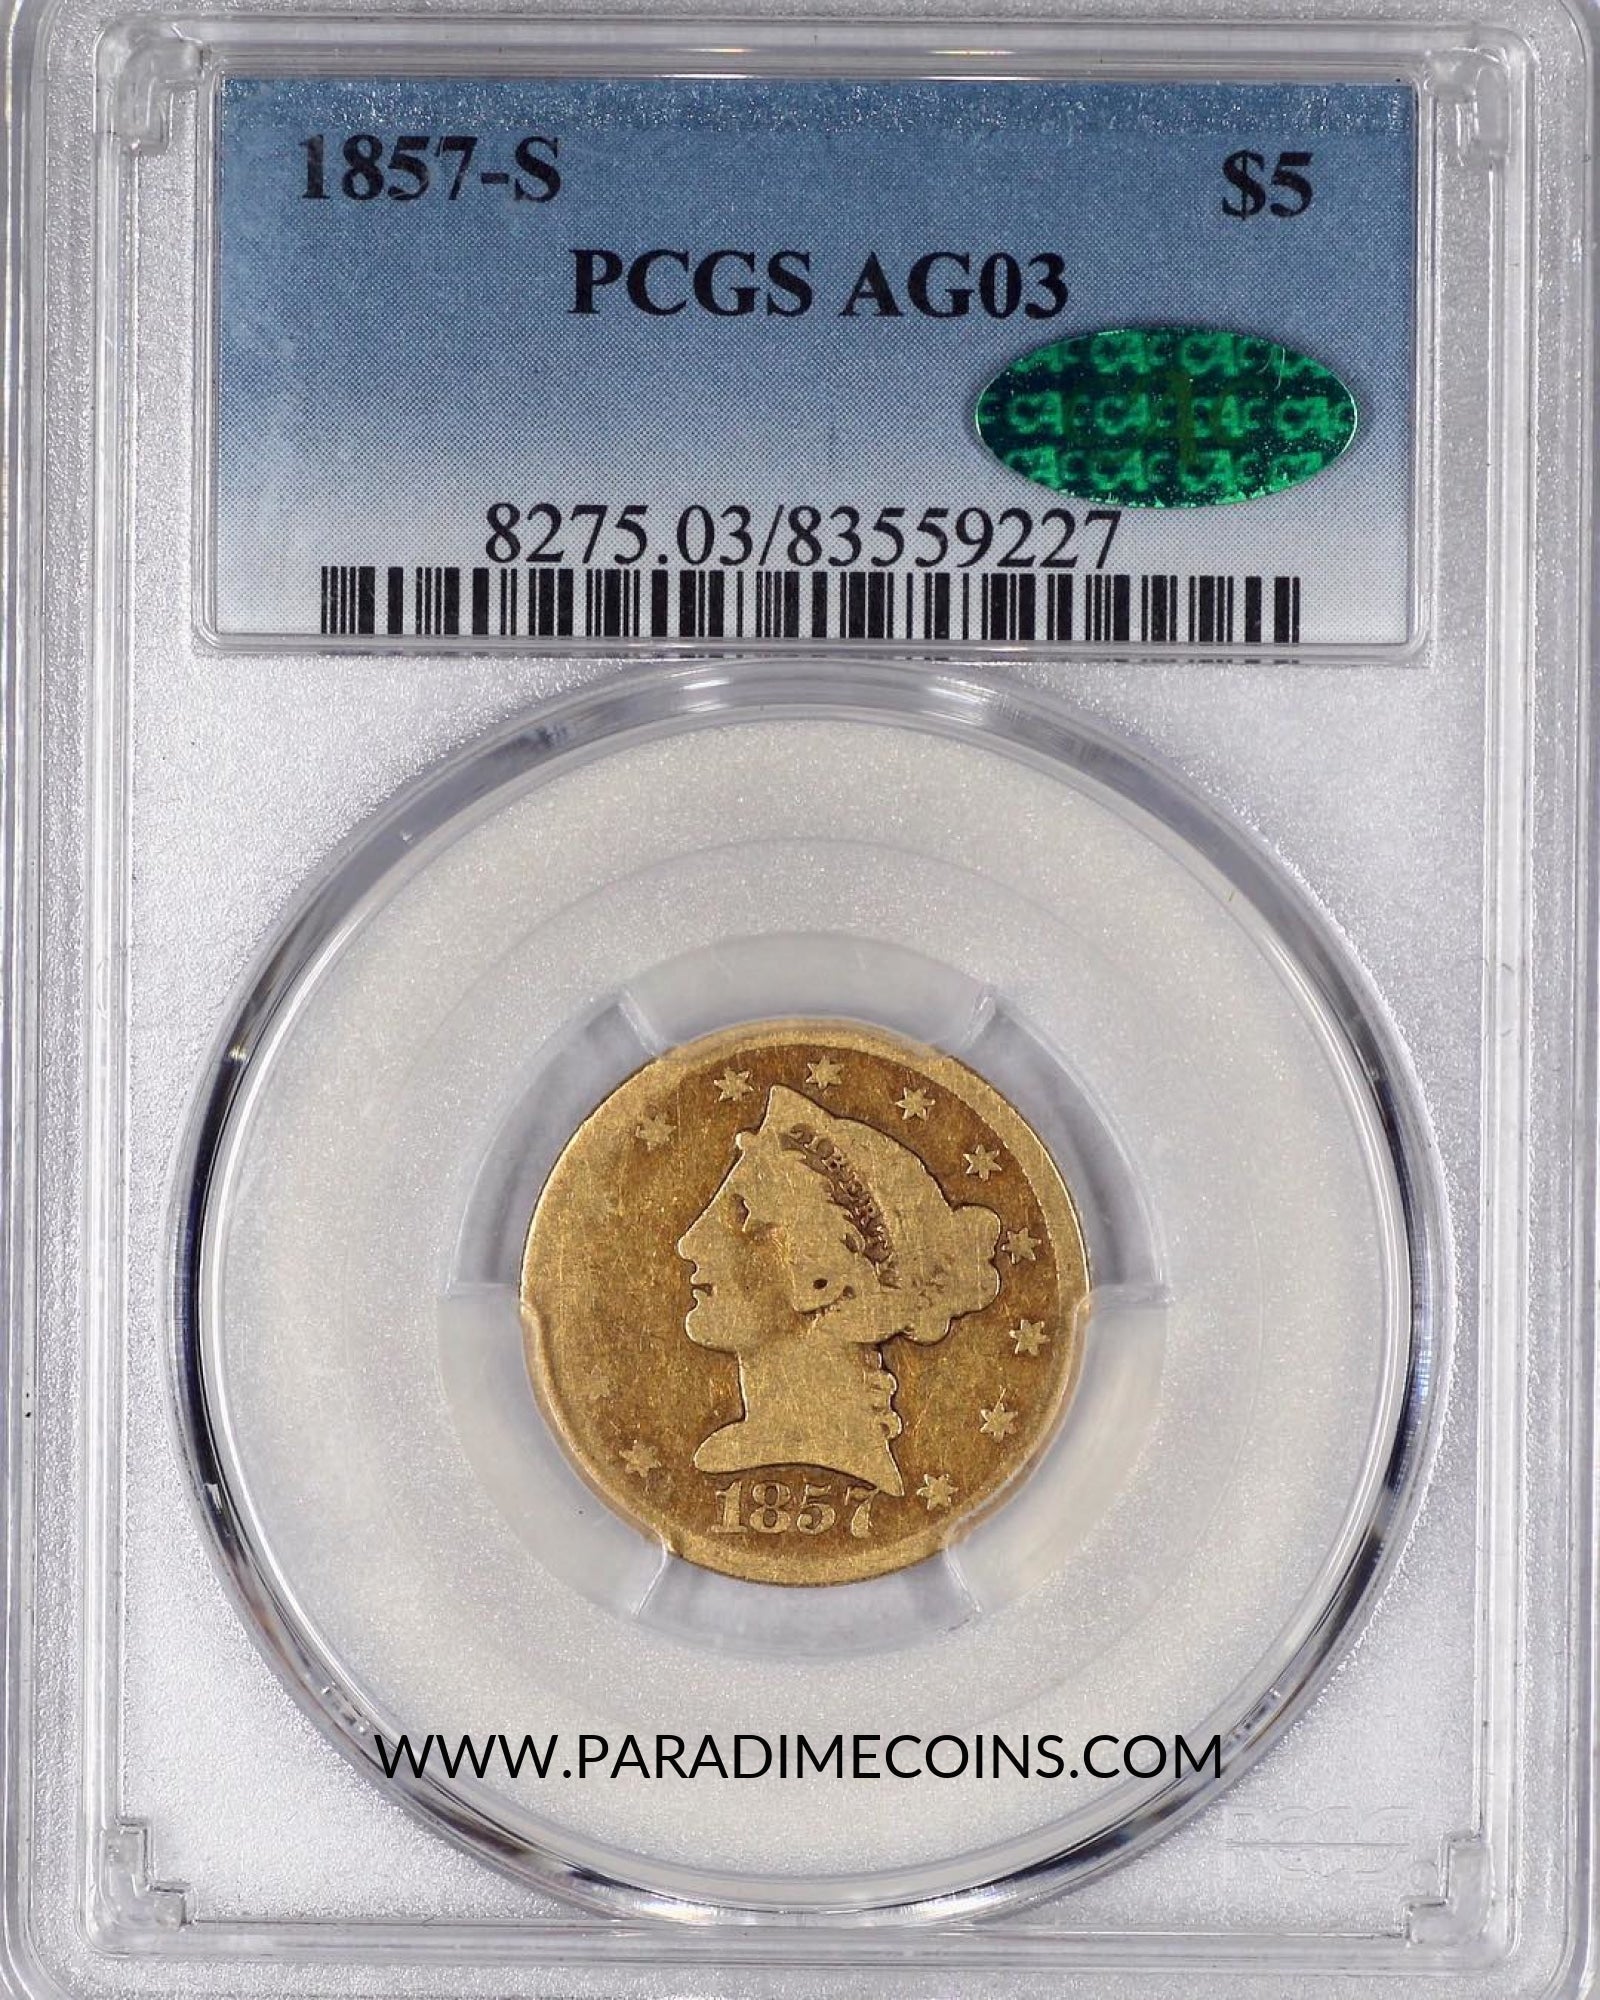 1857-S $5 AG03 PCGS CAC - Paradime Coins US Coins For Sale